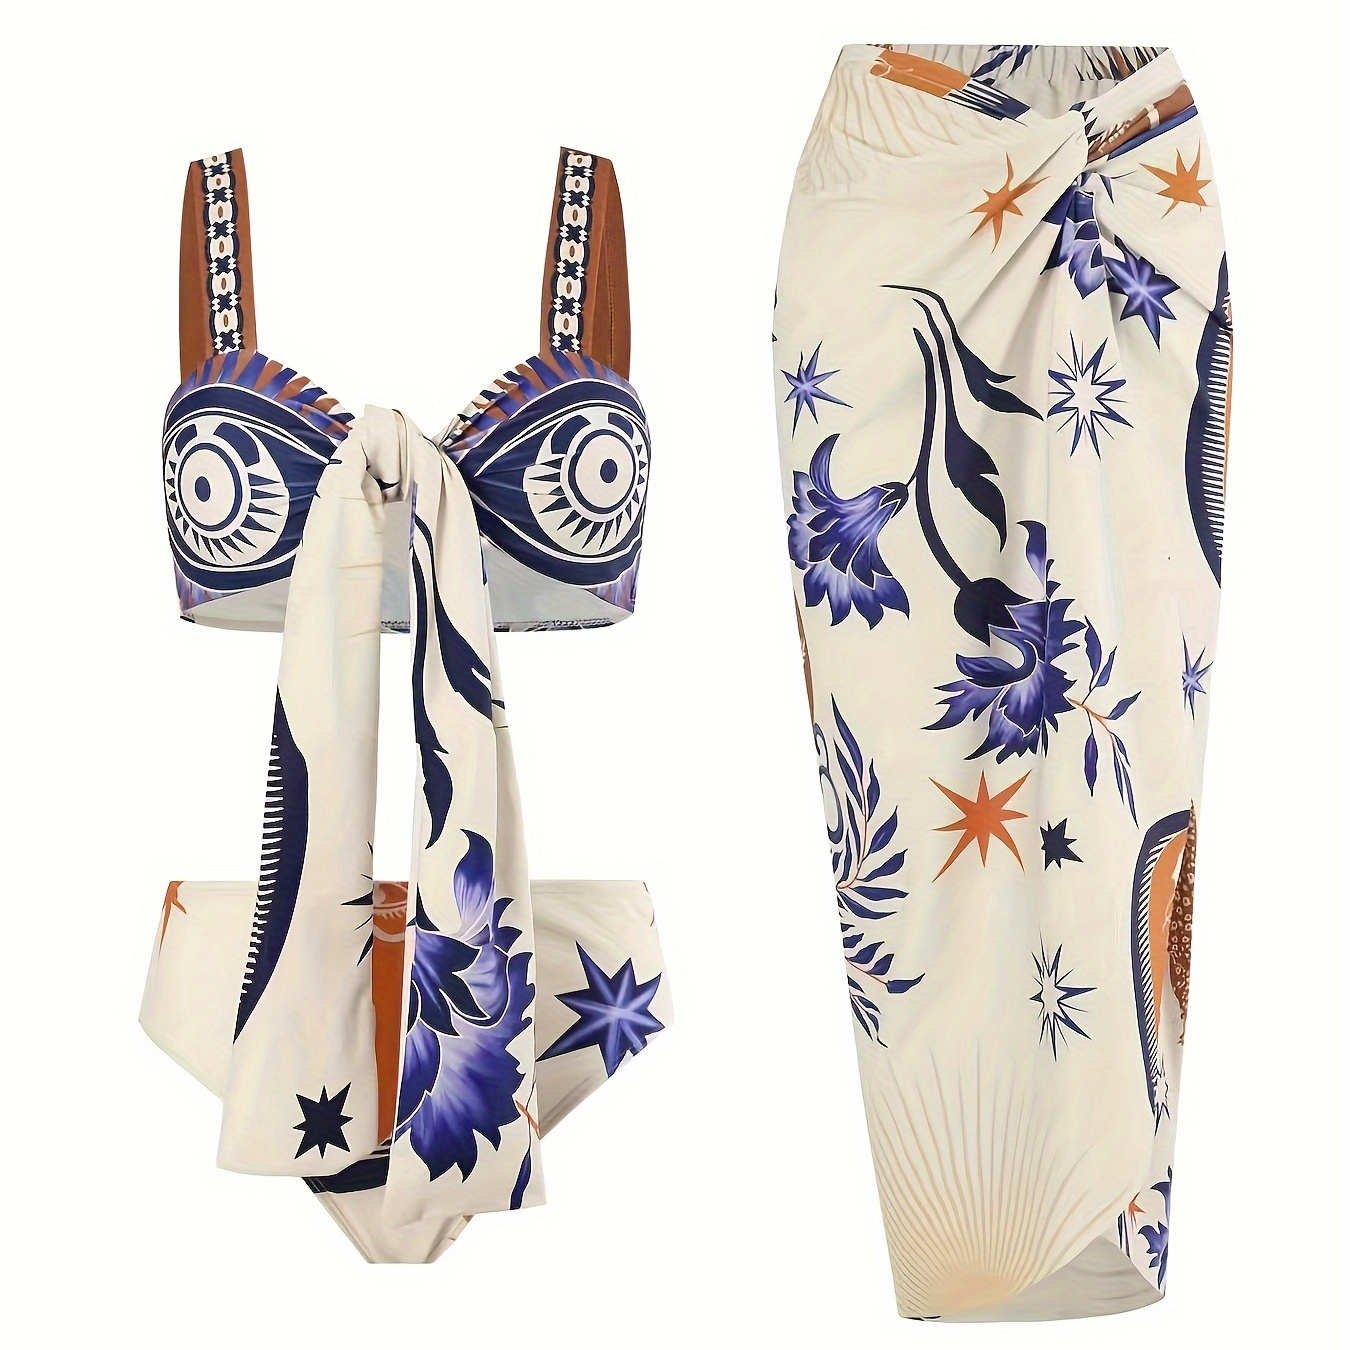 

Floral Pattern 3 Piece Set Bikini, Knotted Front High Cut With Cover Up Skirt Swimsuits, Women's Swimwear & Clothing